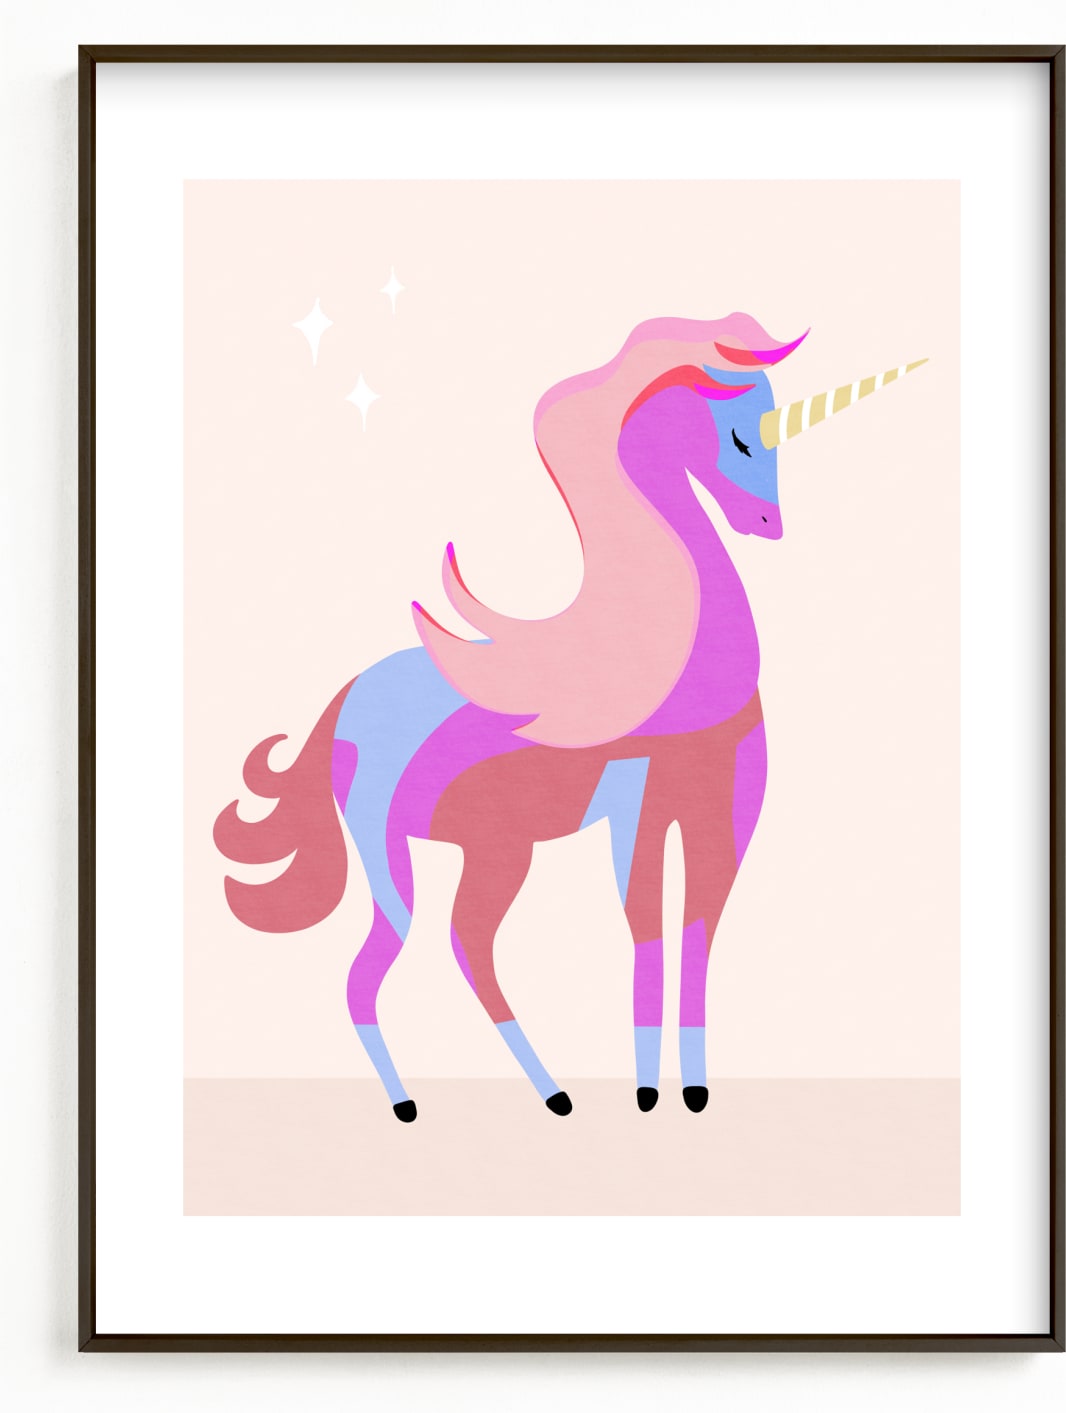 This is a colorful kids wall art by Maja Cunningham called Unicorns are real.